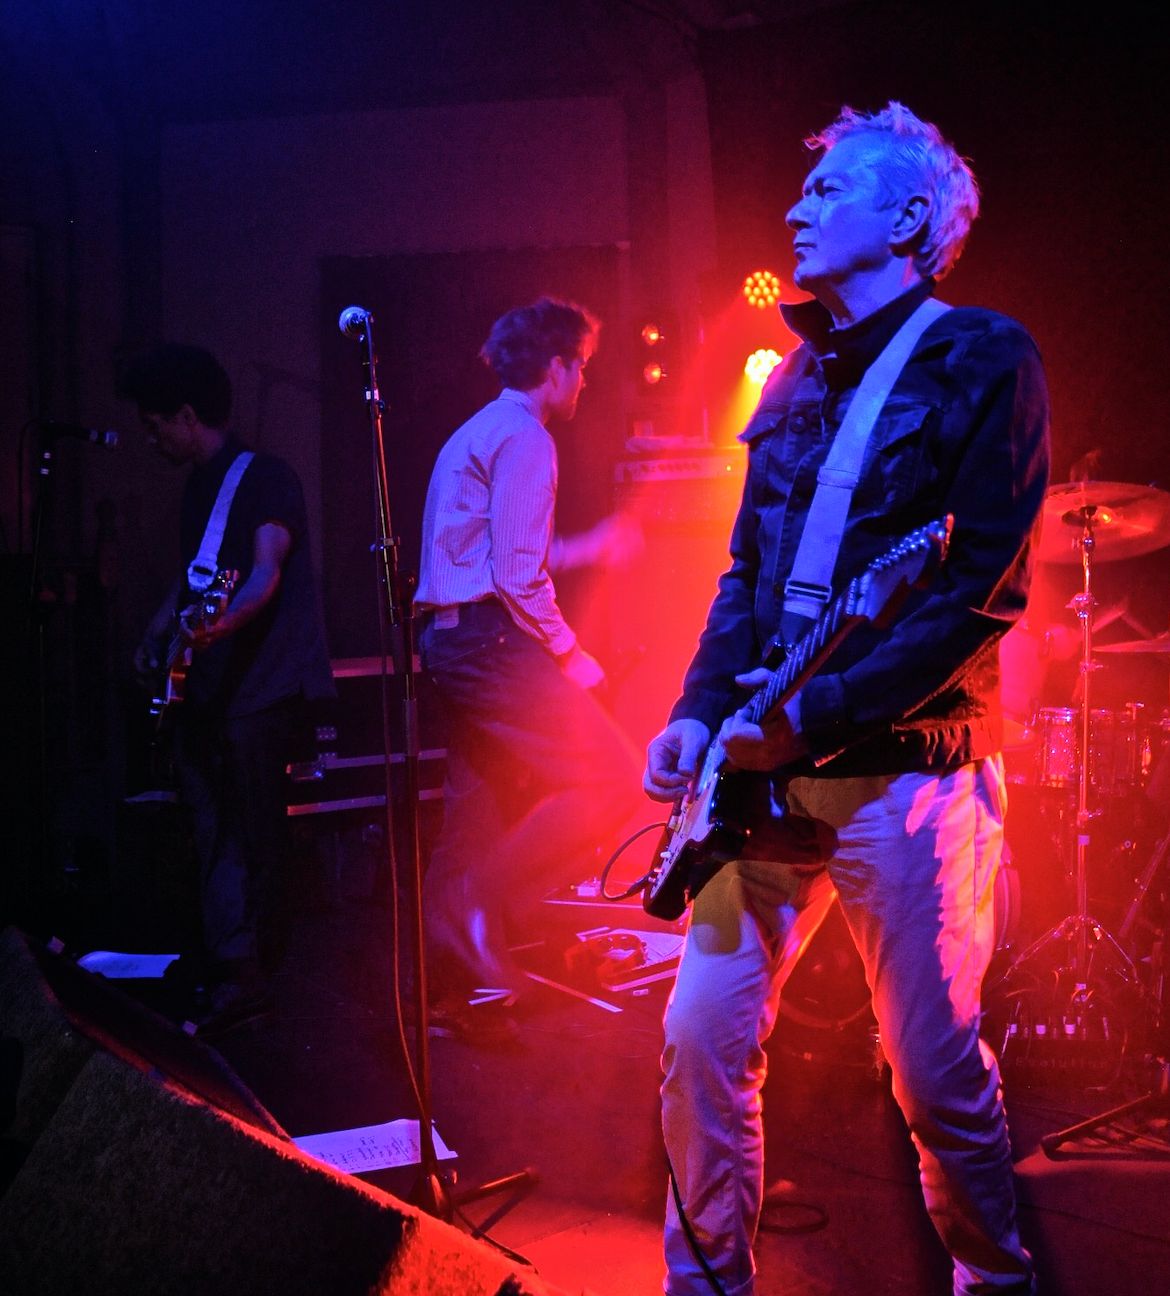 Andy Gill performing with band Gang of Four